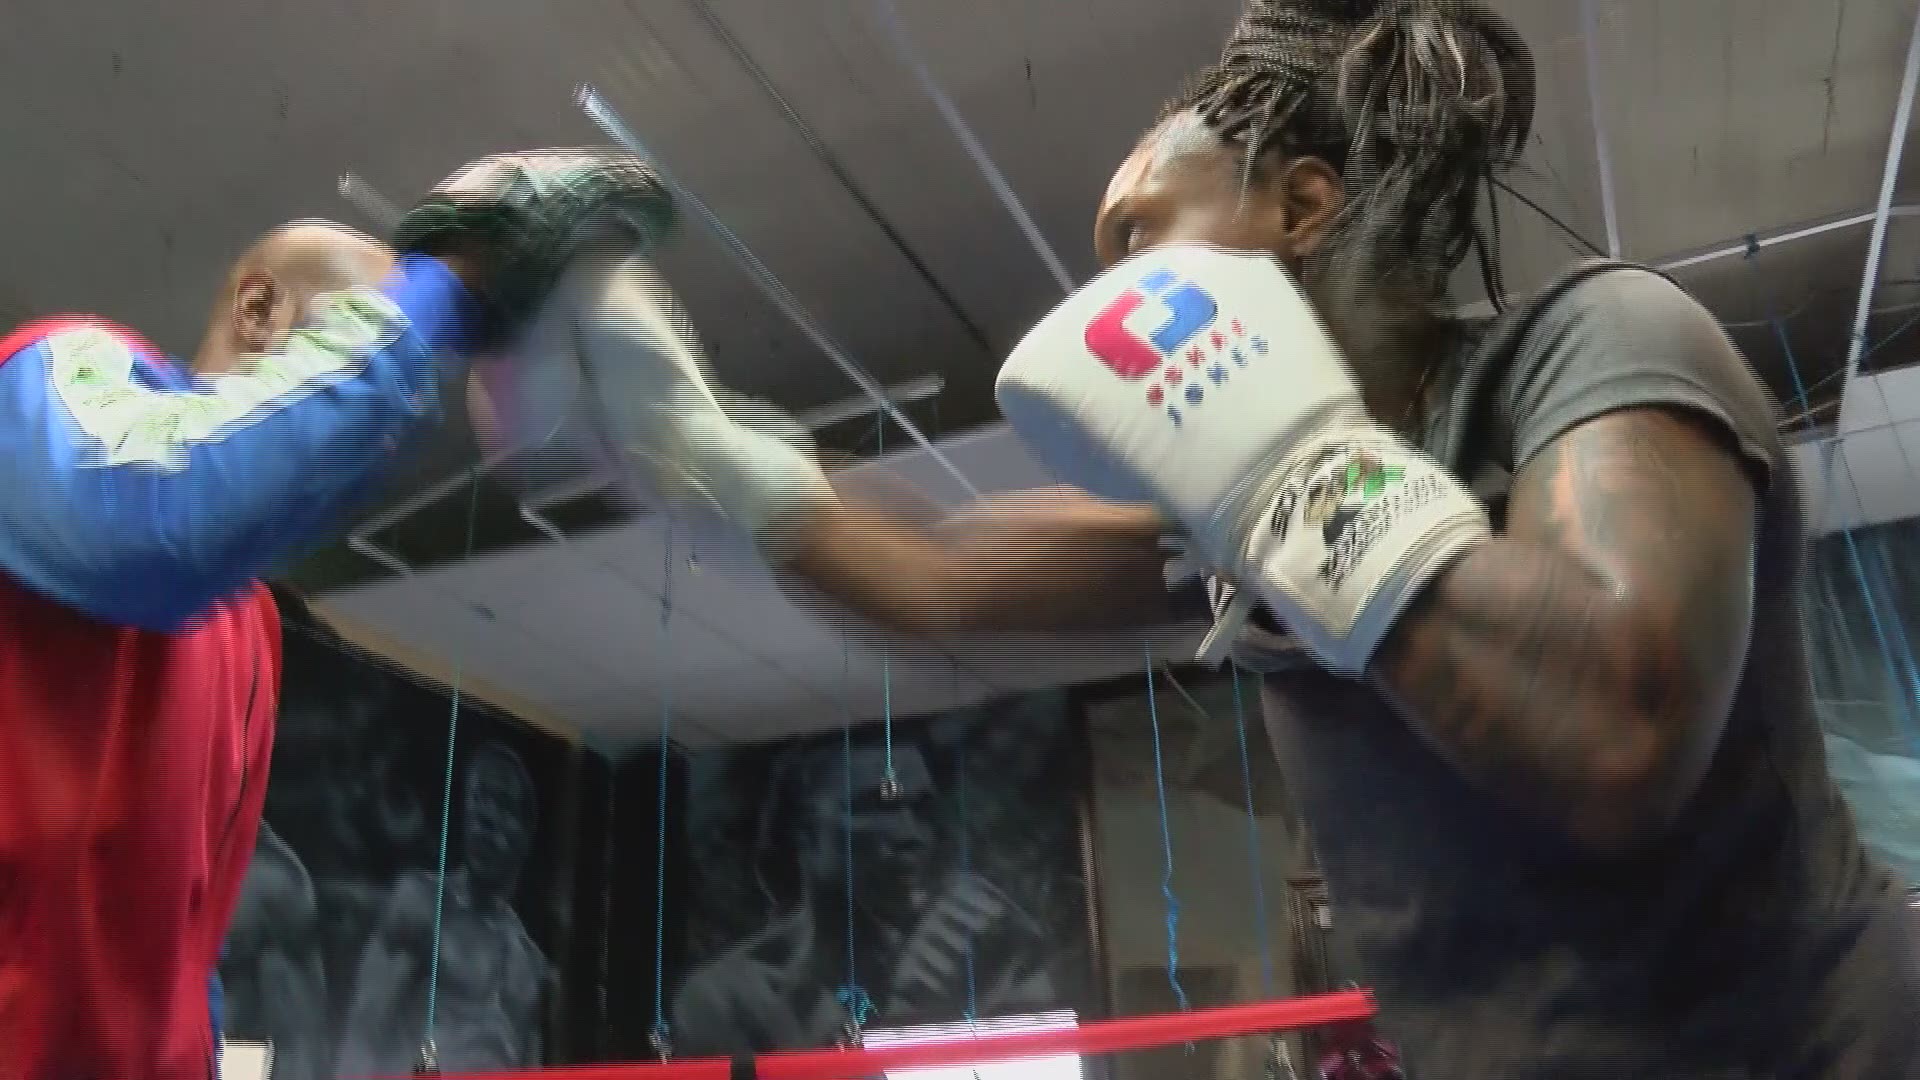 Jones has traveled the world to fight, but now she's ready to take her biggest leap yet. She will be representing the United States in the Tokyo Olympics.